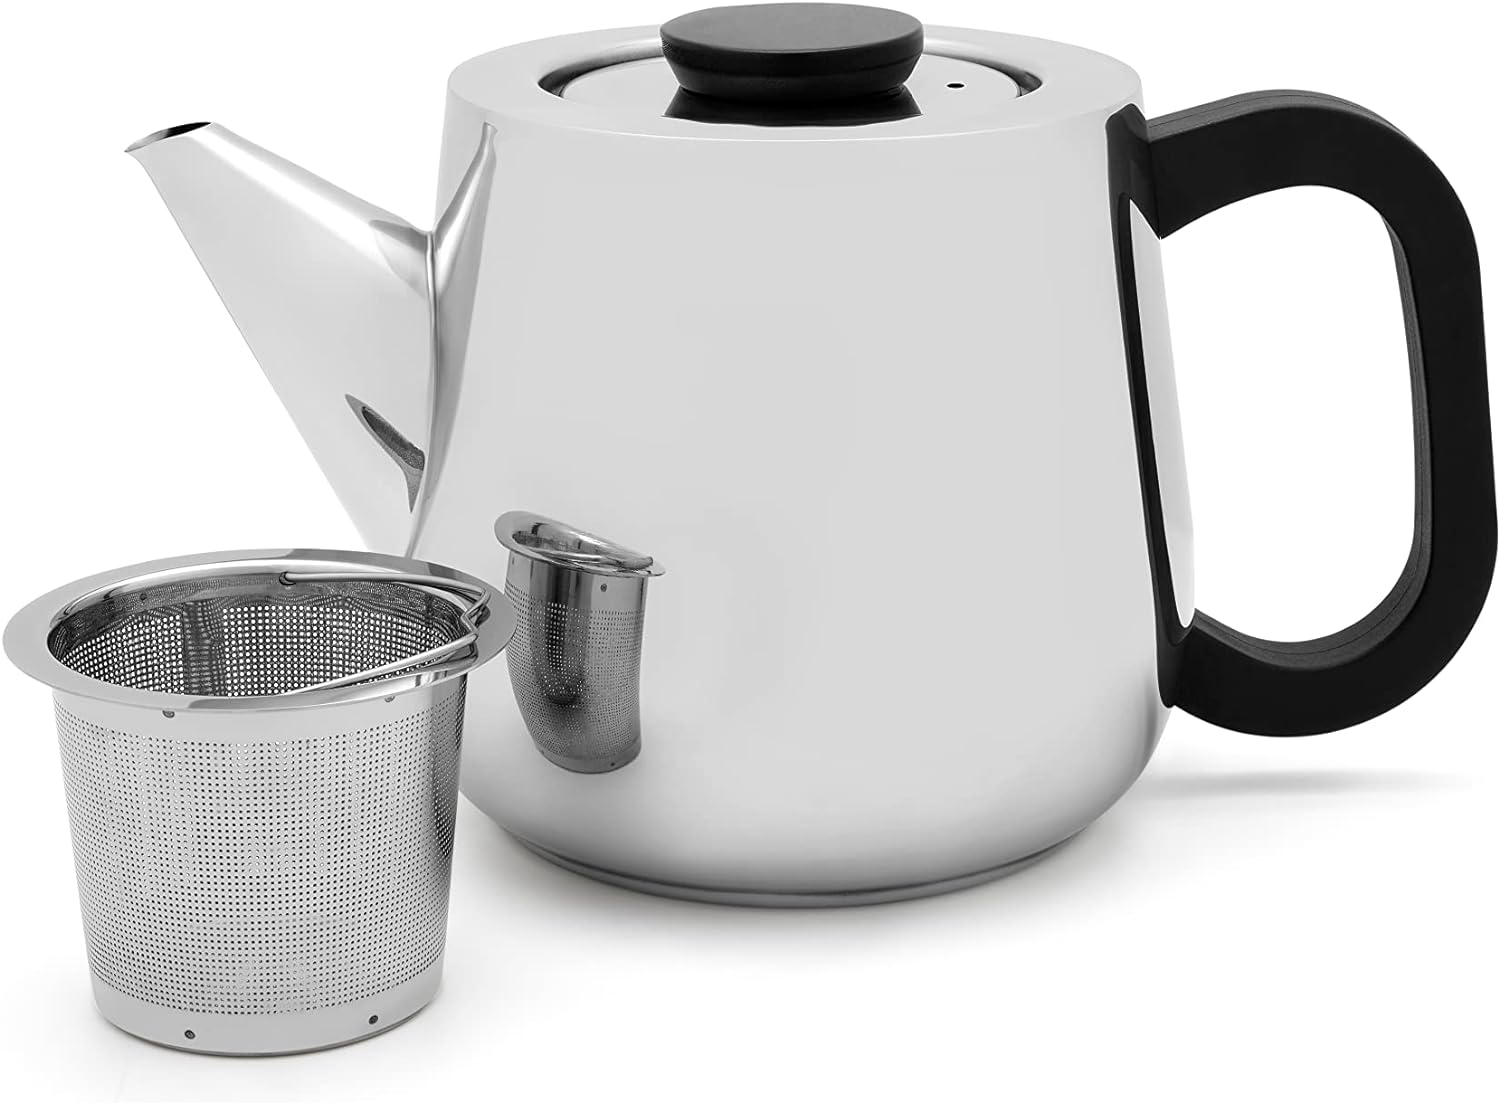 Teapot 1.0 Litre with Stainless Steel Tea Filter Insert for Loose Tea - Silver Single-Walled Stainless Steel Jug with Plastic Handle